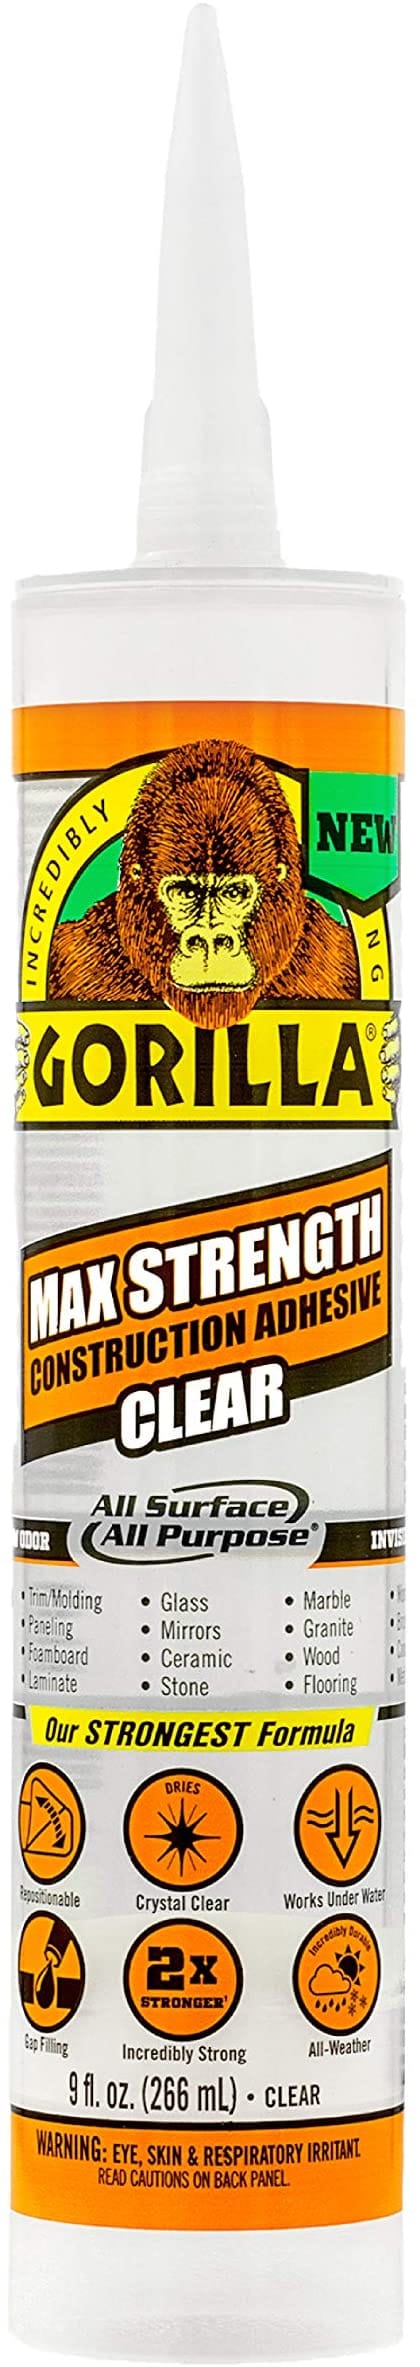 Gorilla Max Strength Clear Construction Adhesive, 9 ounce Cartridge, (Pack of 1) BONDS: Glass, Ceramic, Stone, Tile, Wet Surfaces, Landscaping, Decks, Trim/Molding, Metal, and More!- 8212302